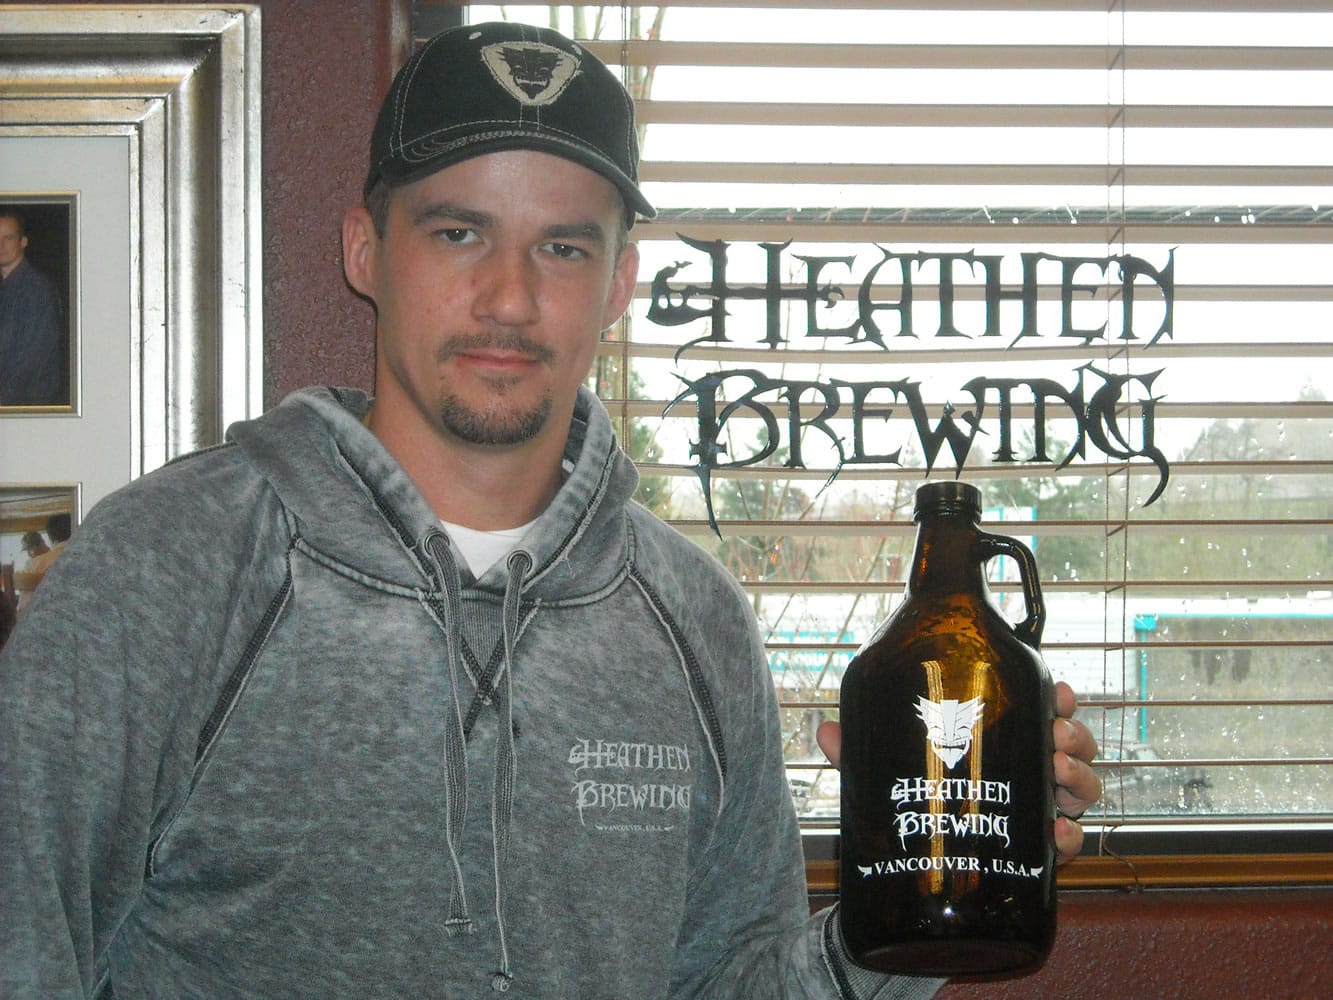 Sunny Parsons, co-owner of Heathen Brewing